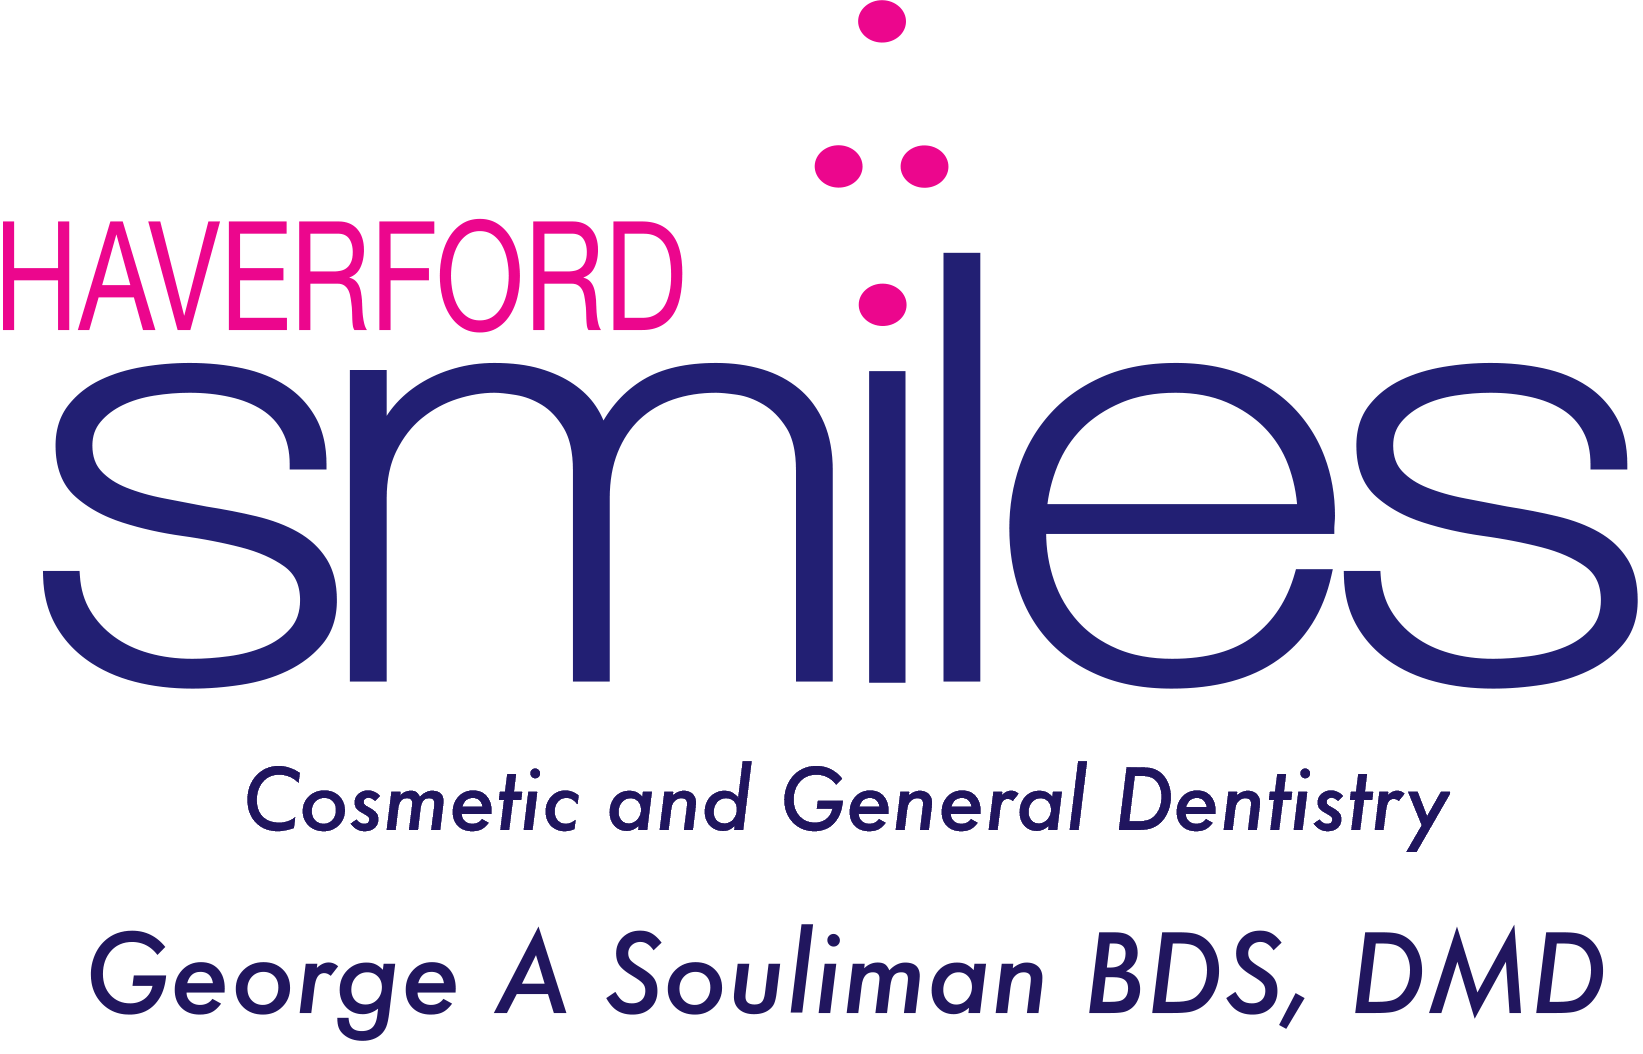 Haverford Logo - Haverford Smiles Cosmetic and General Dentistry